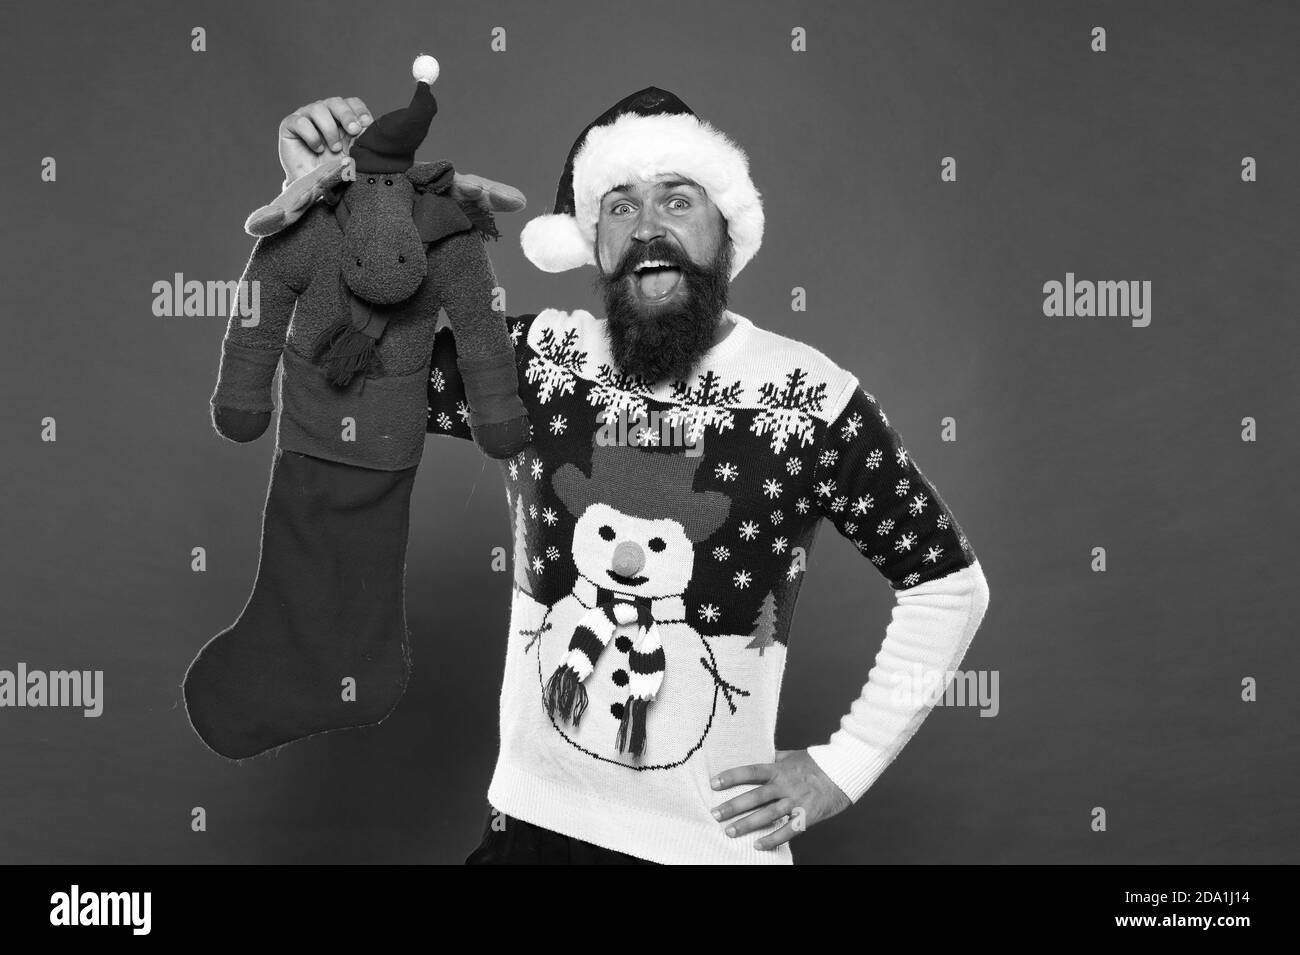 Each surprise is just that. Surprised hipster hold reindeer toy. Bearded man prepare surprise gift. Christmas Santa surprise. Merry xmas. Happy new year. Boxing day. Let Santa surprise you. Stock Photo